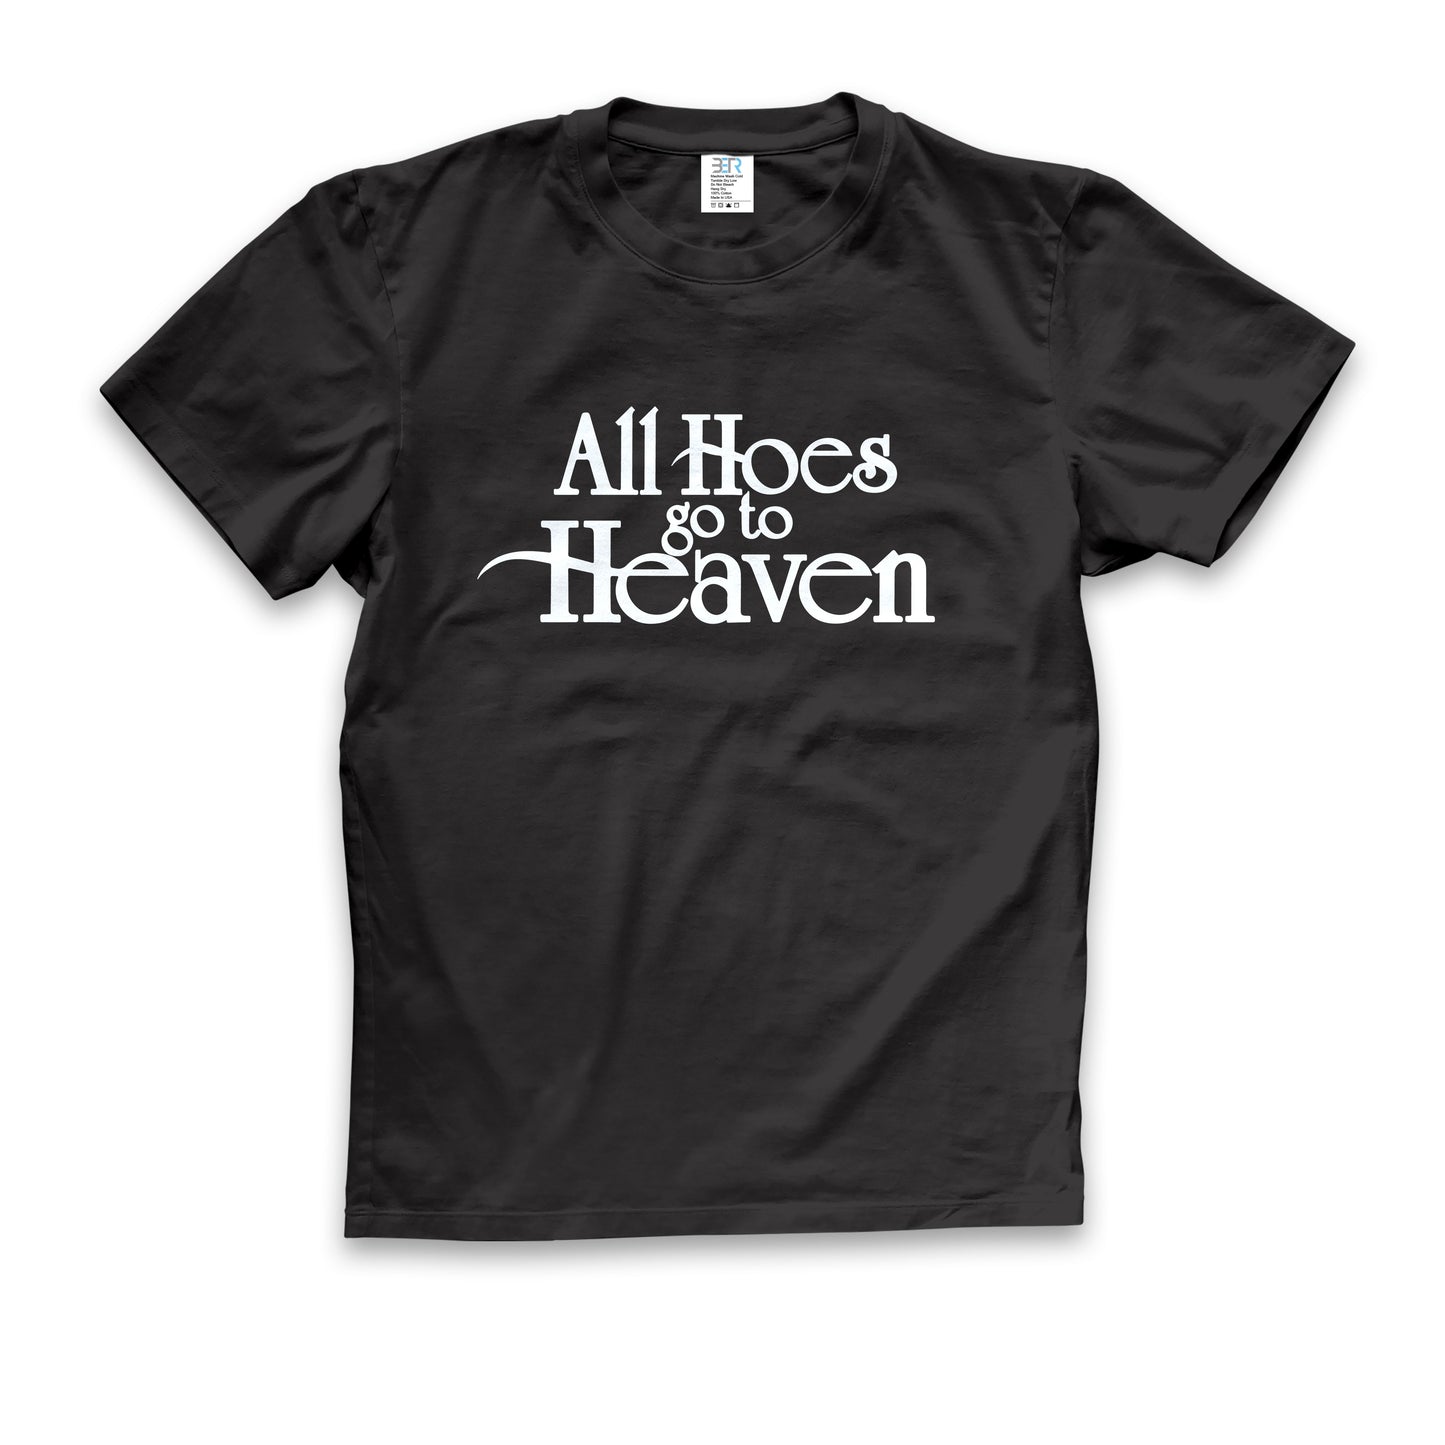 Hoes to Heaven tee